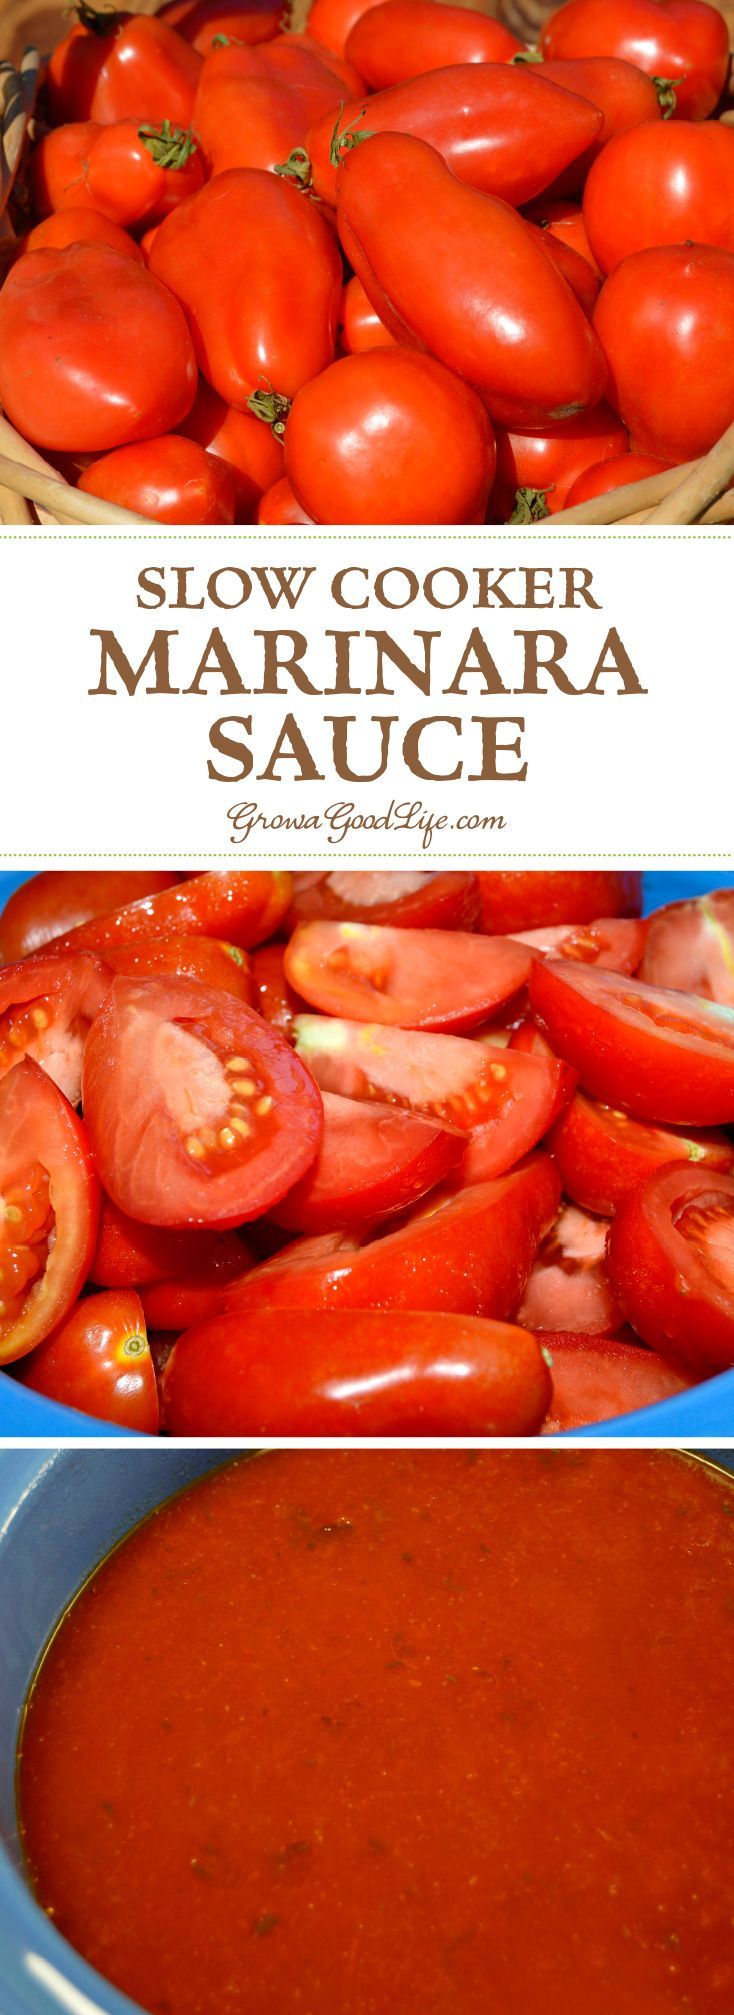 This easy slow cooker marinara sauce made with fresh tomatoes is rich and flavorful. It takes little effort to fill the slow